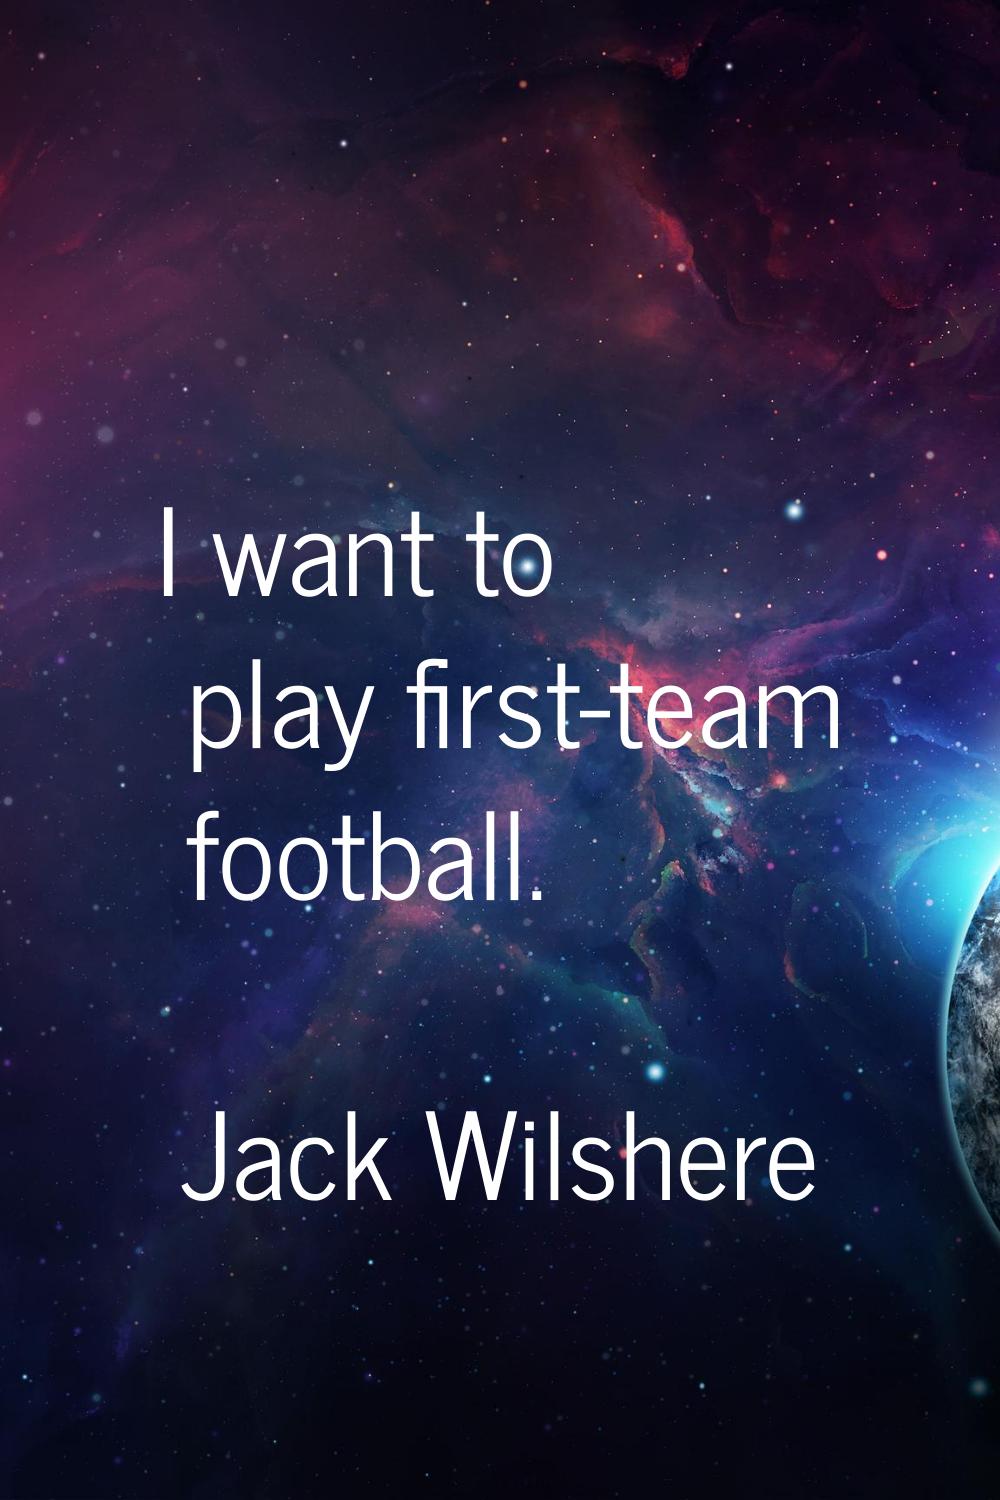 I want to play first-team football.